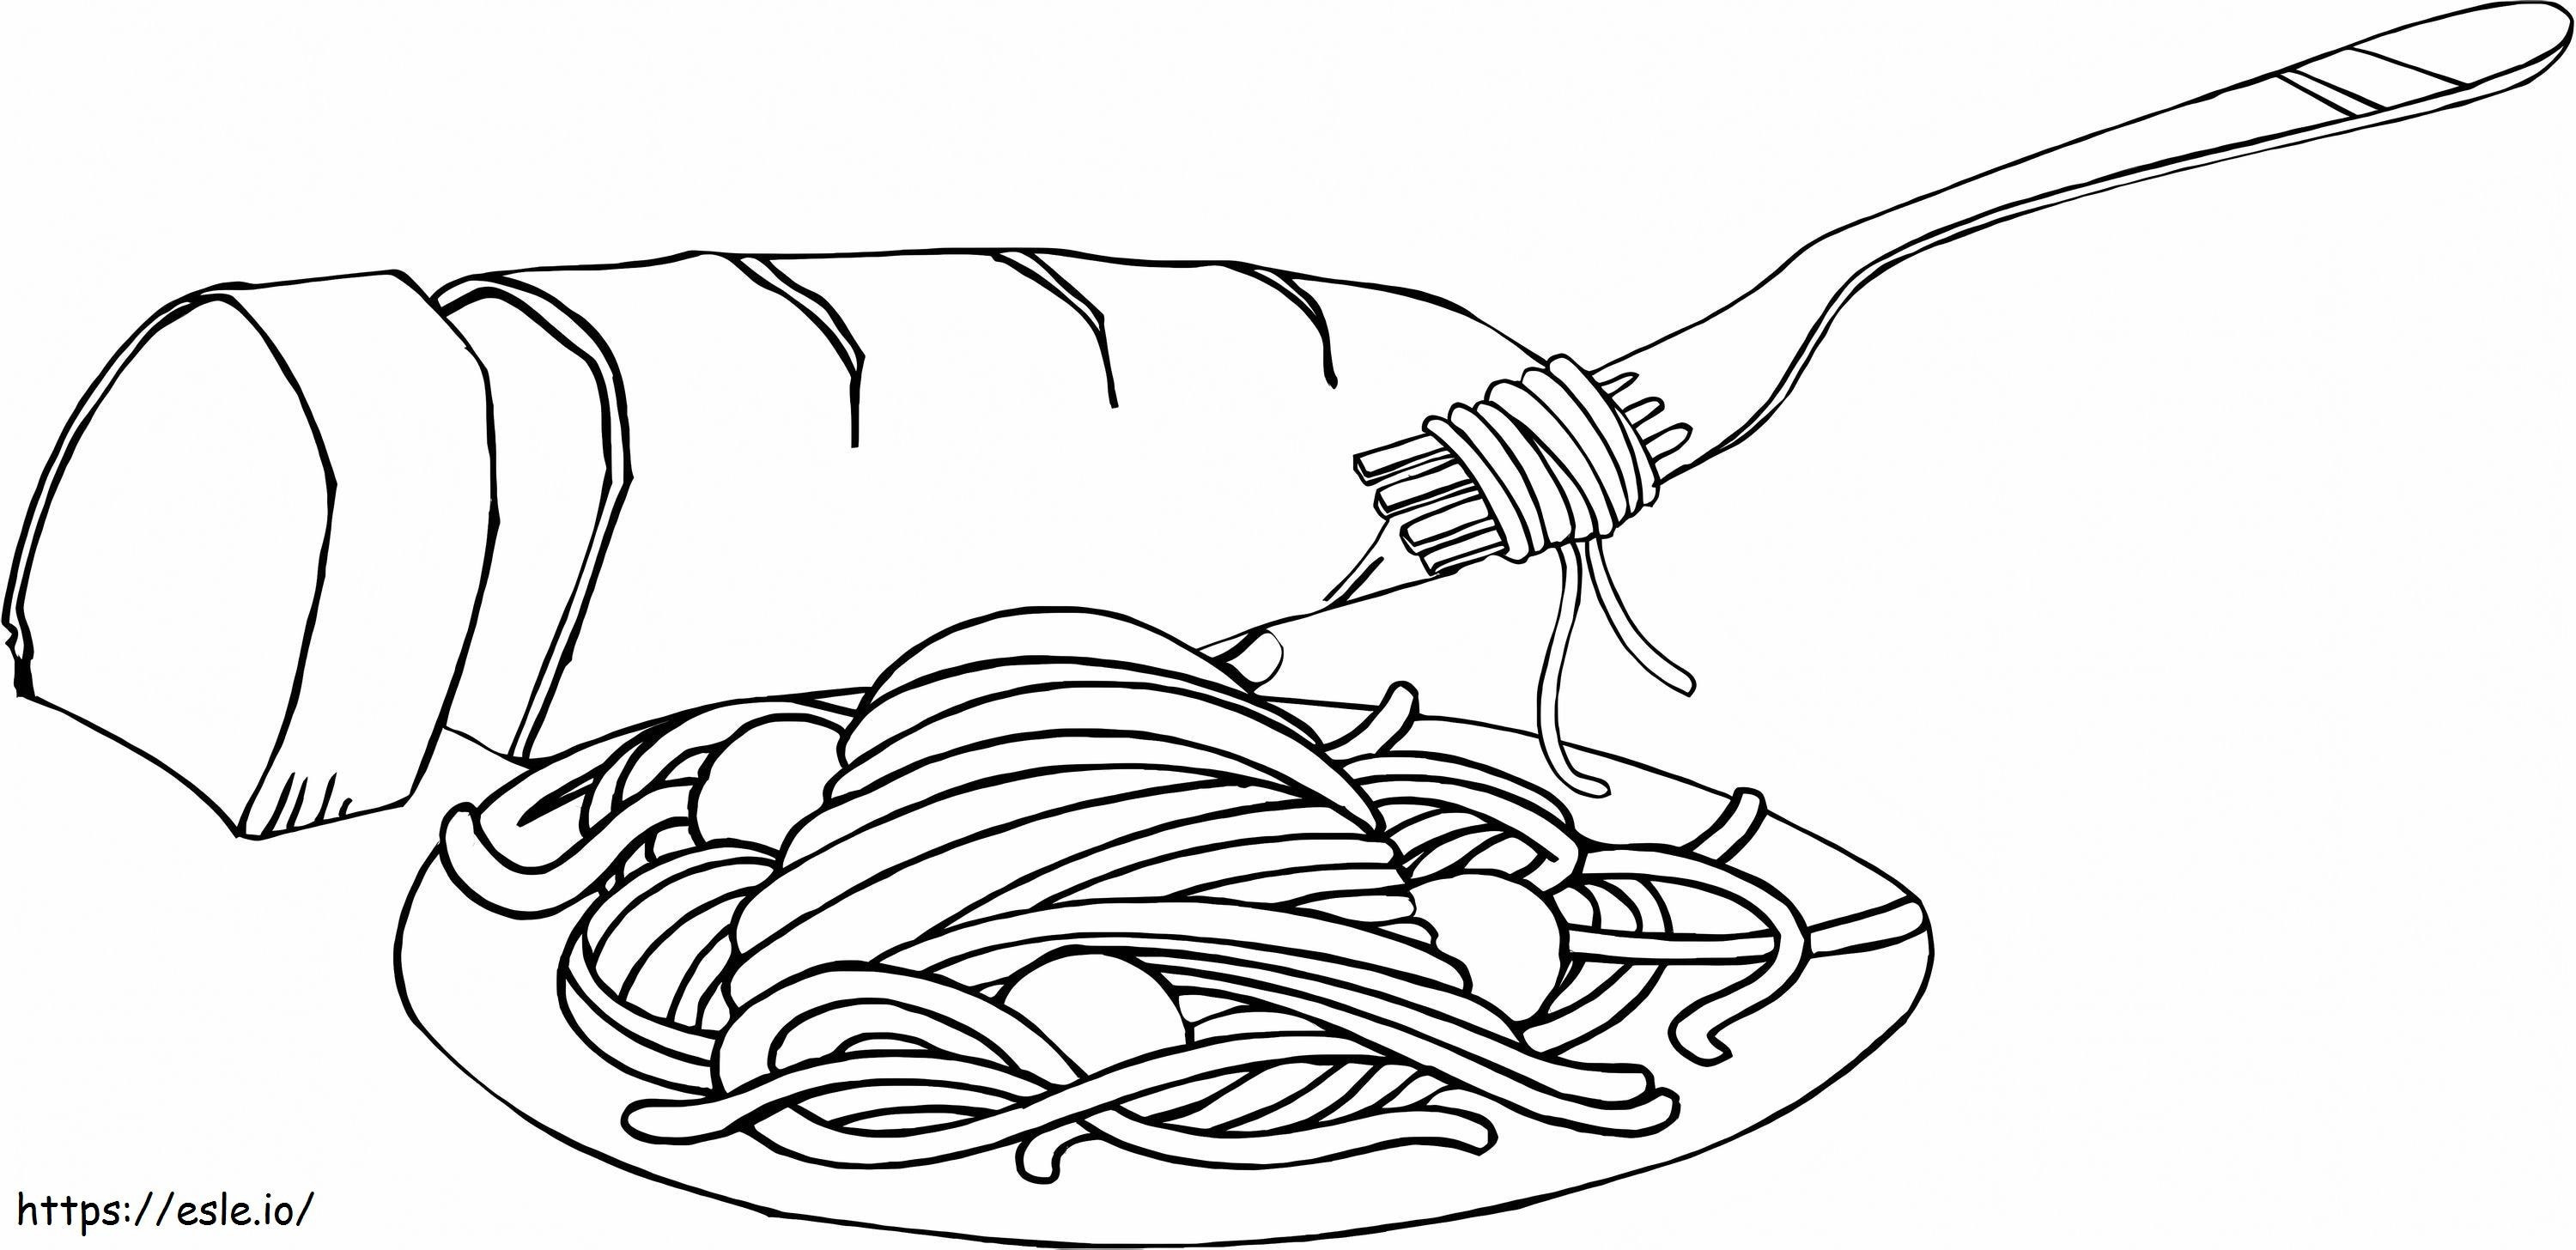 Pasta And Bread coloring page